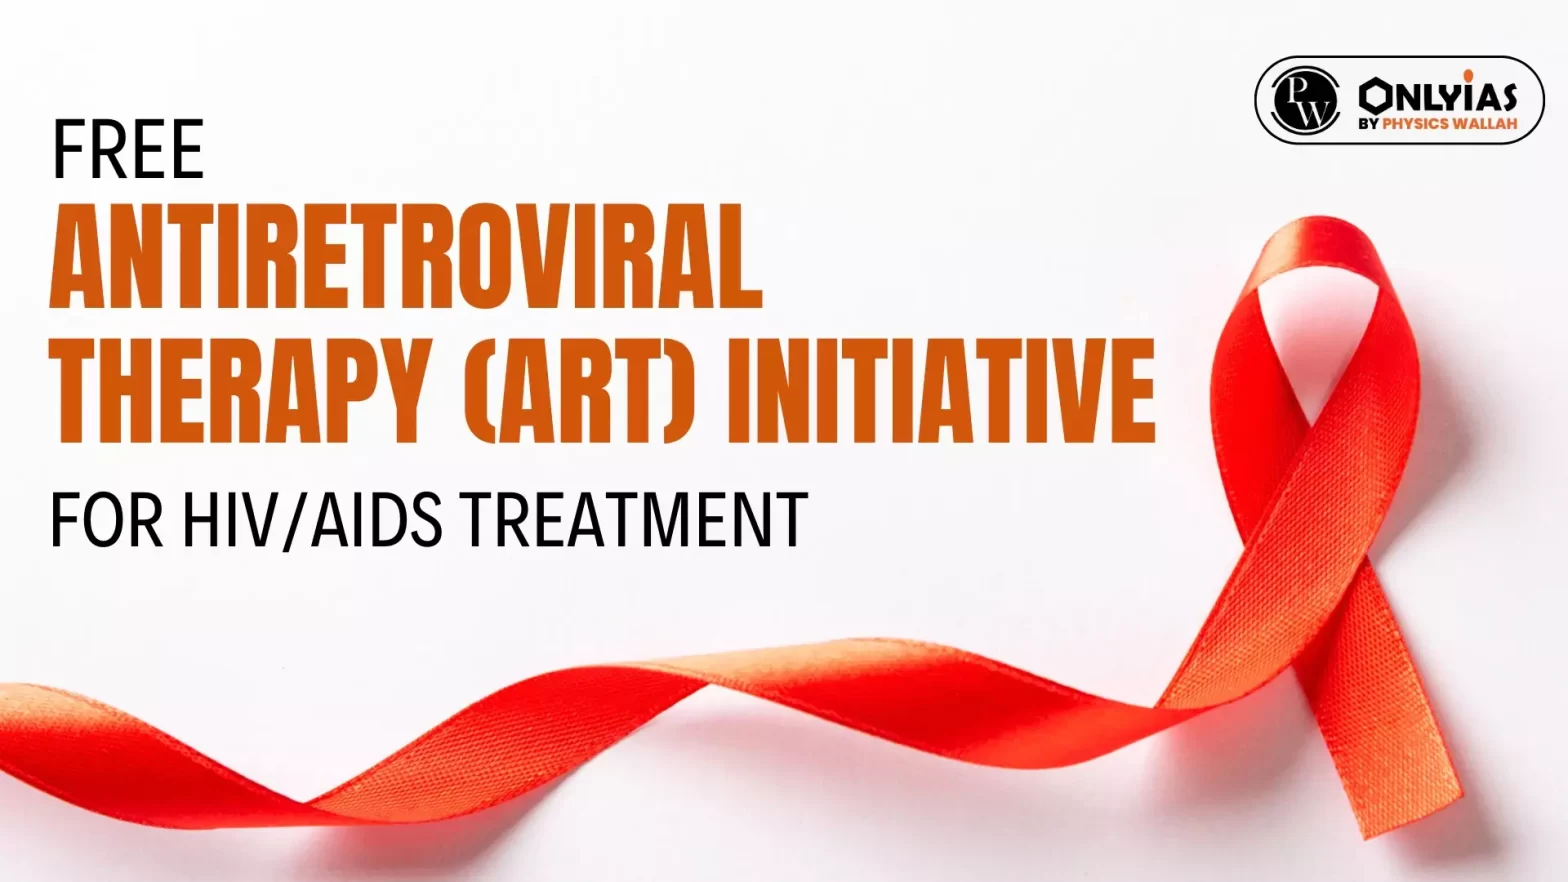 Free Antiretroviral Therapy (ART) Initiative For HIV/AIDS Treatment